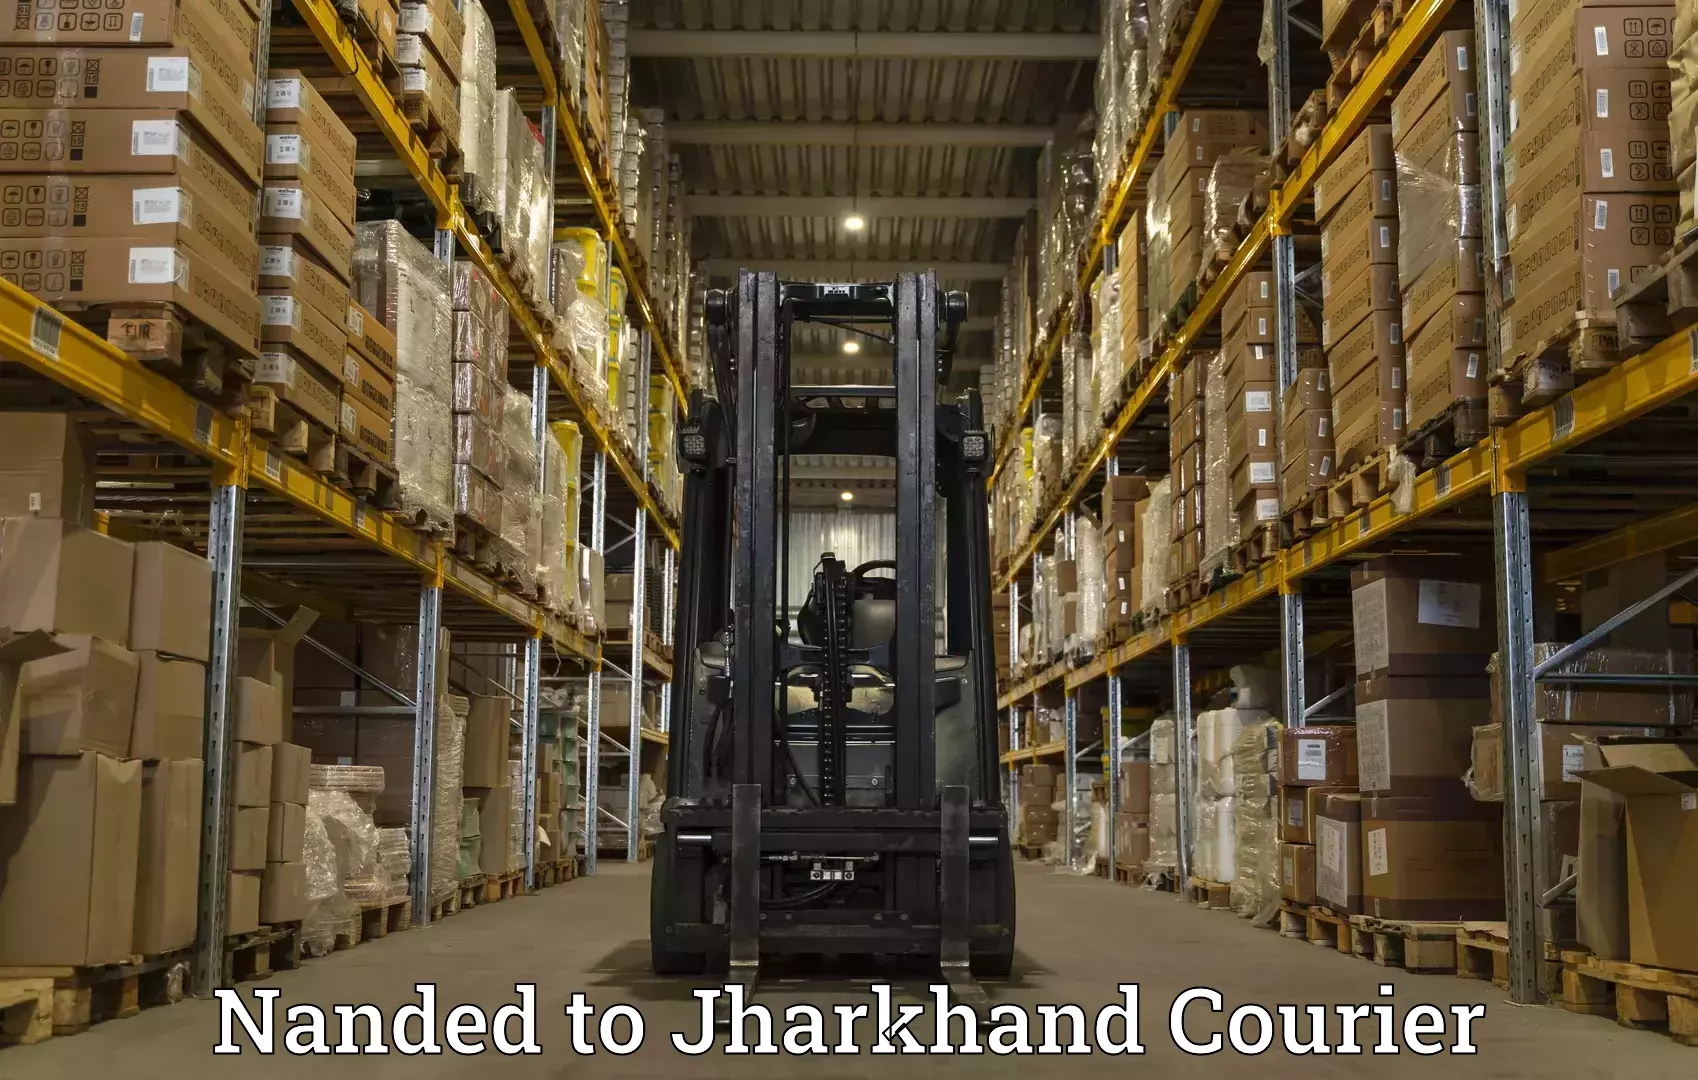 Efficient order fulfillment Nanded to Peterbar